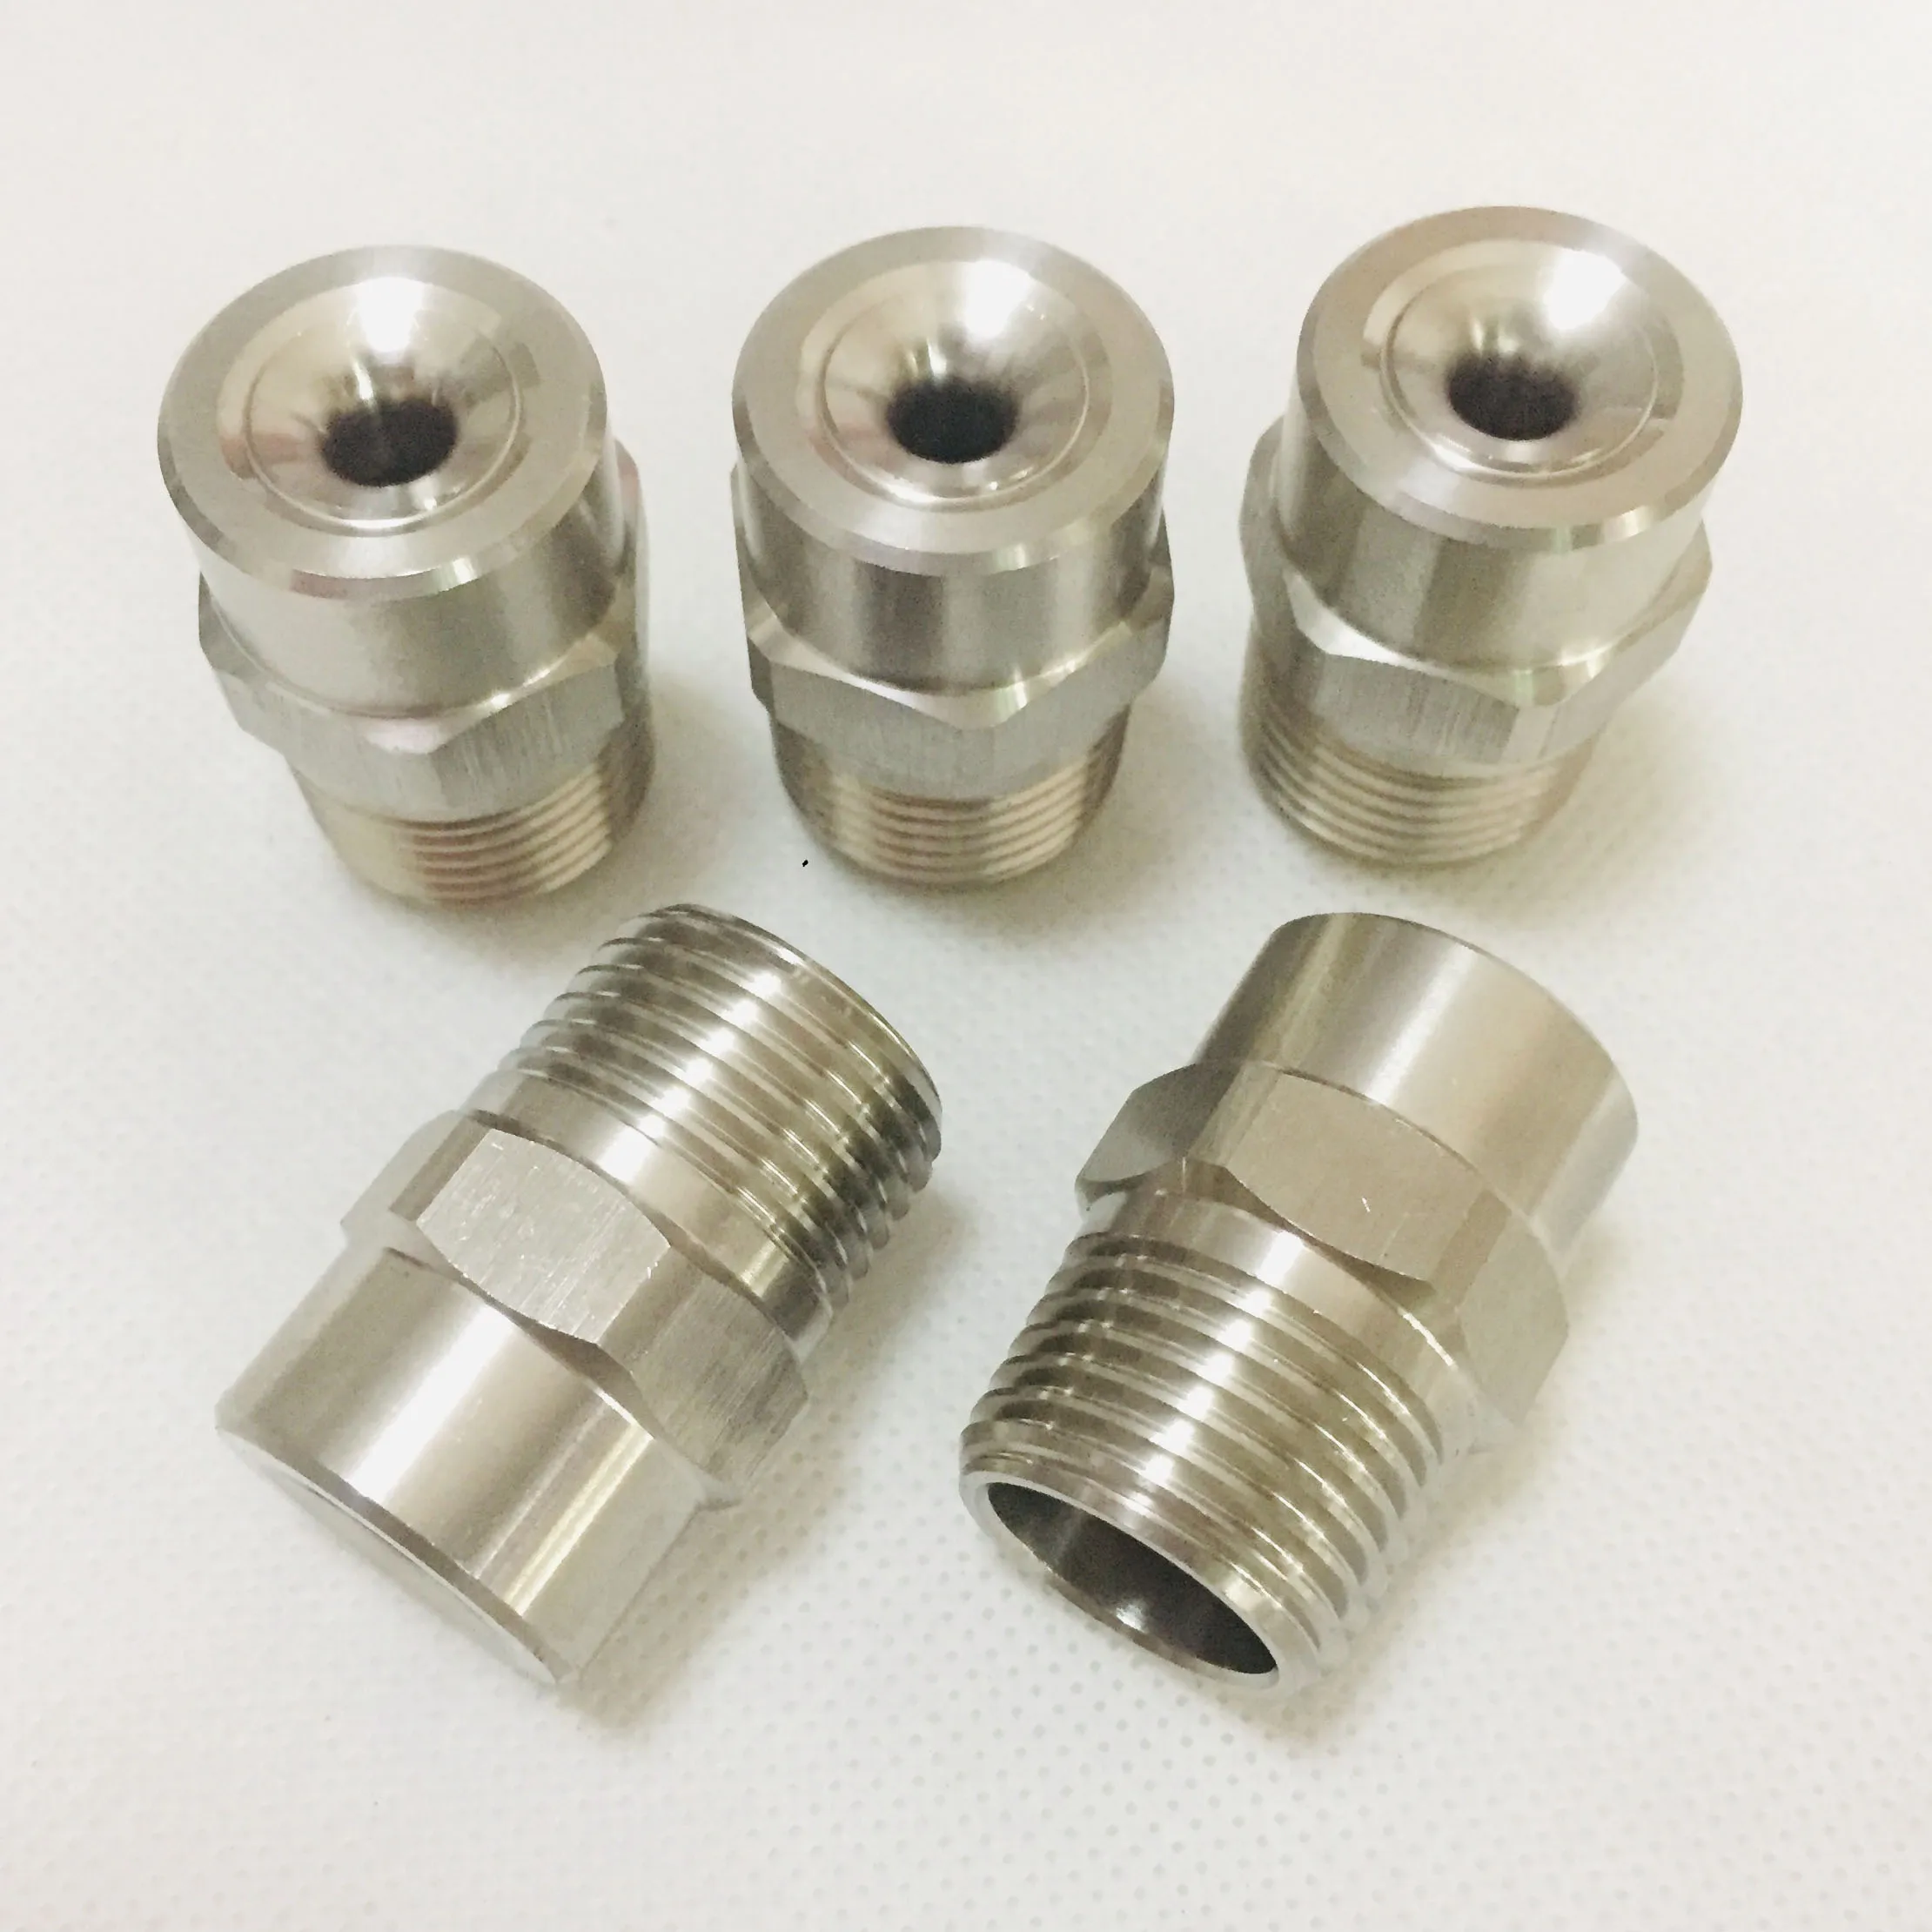 ( 10 pcs/lot ) 1/8" 1/4" 3/8" 1/2" 3/4" 1" BSPT 304 stainless steel wide angle water jet nozzle full cone spray nozzle